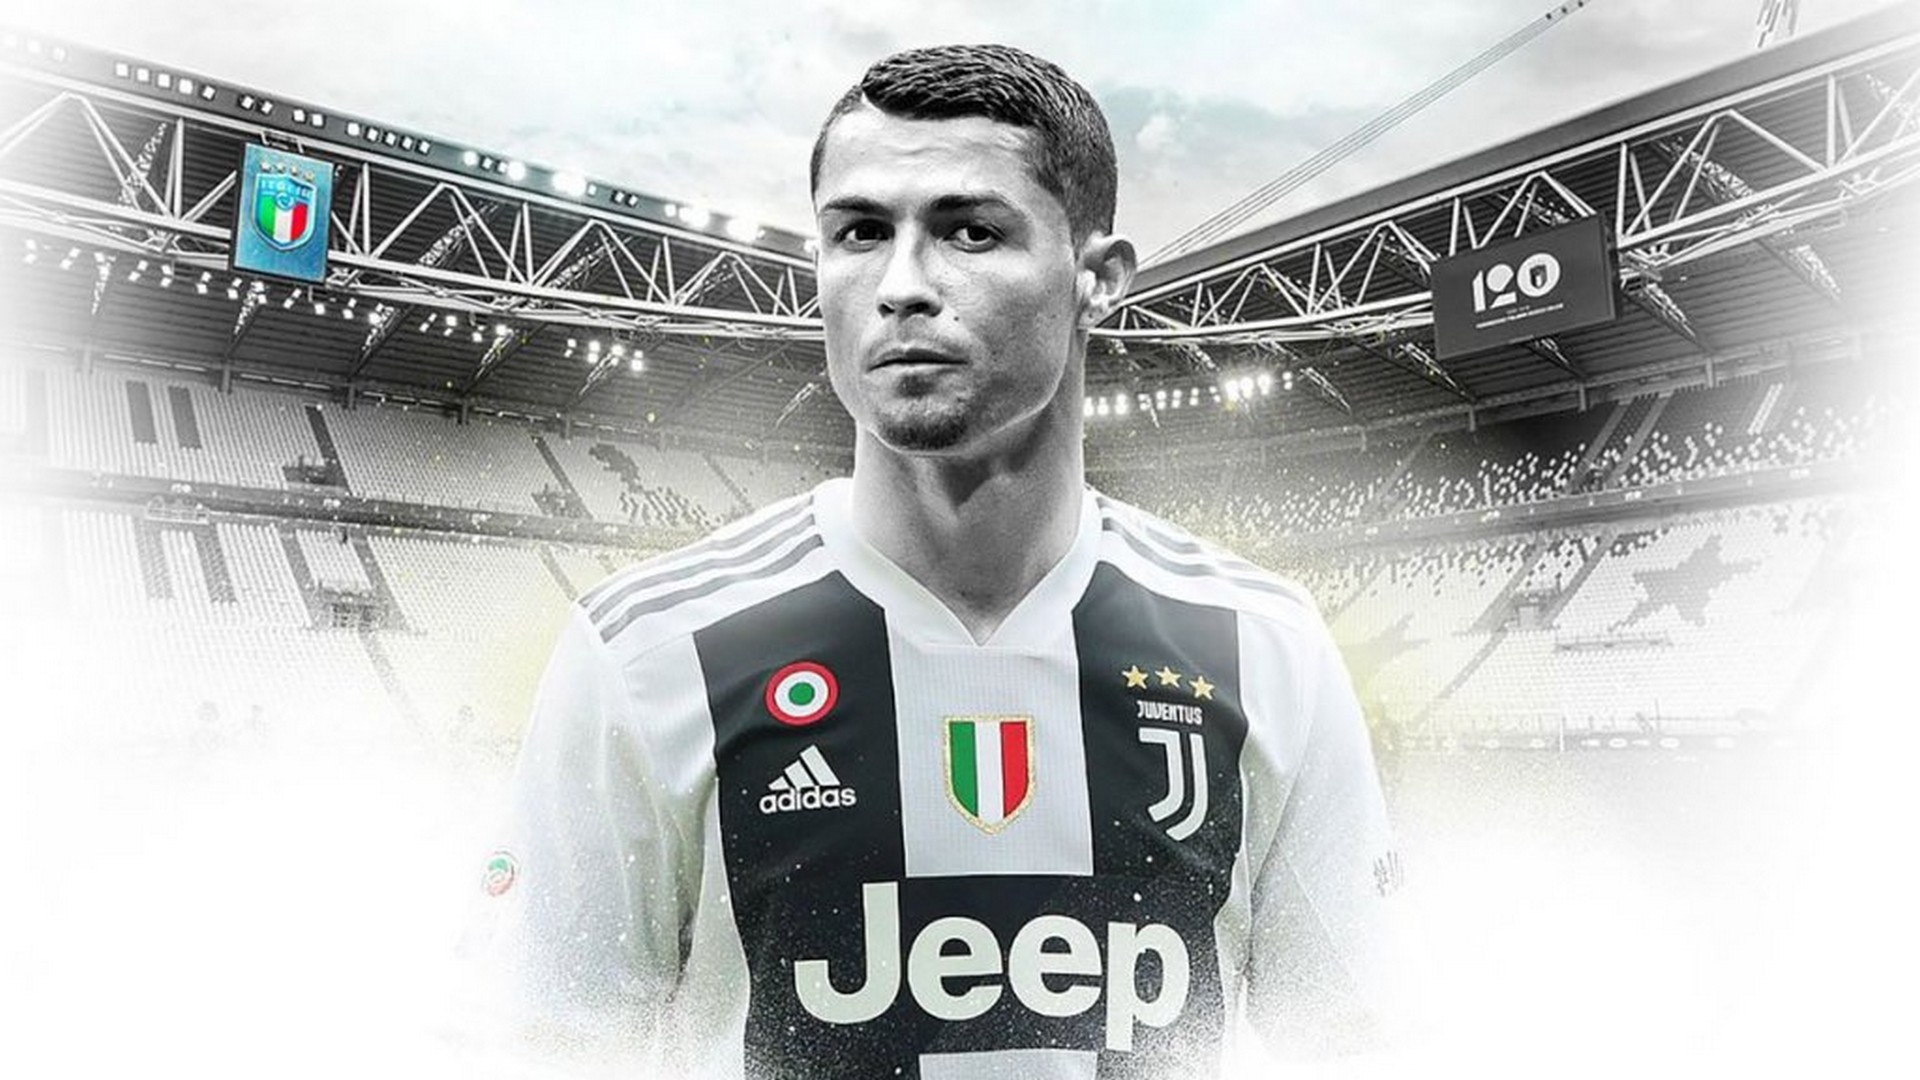 Wallpaper CR7 Juventus Desktop with image resolution 1920x1080 pixel. You can use this wallpaper as background for your desktop Computer Screensavers, Android or iPhone smartphones